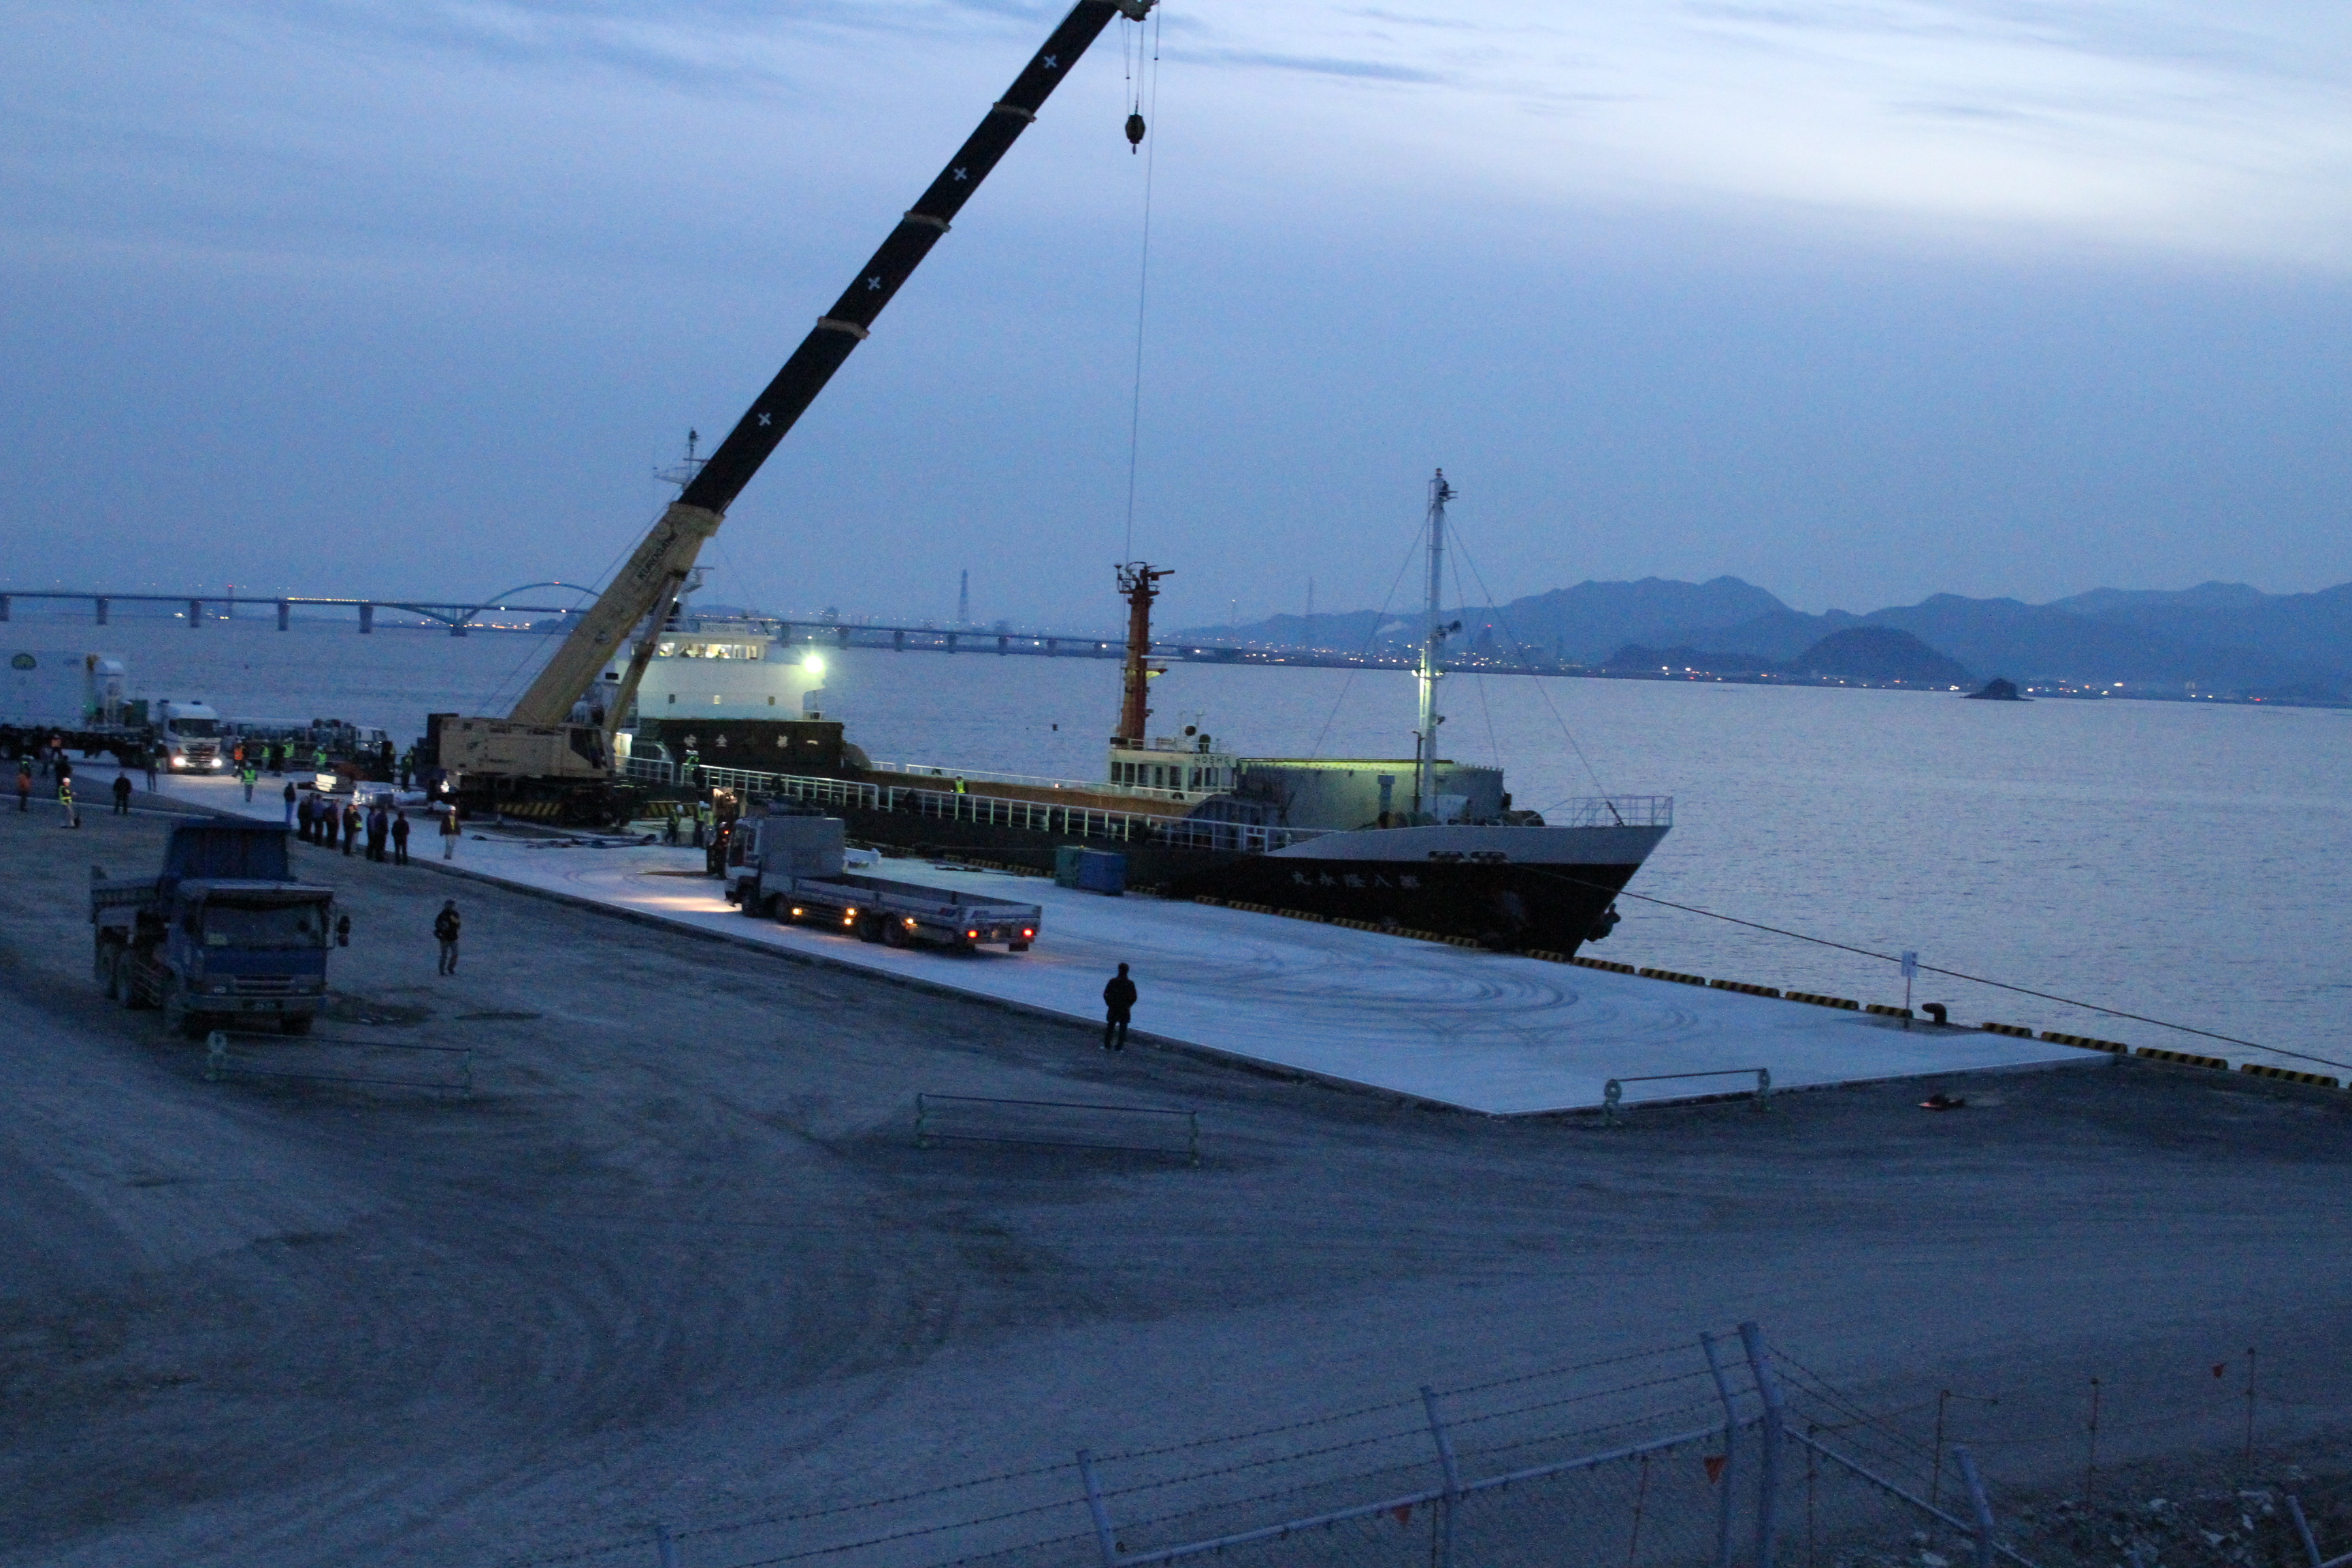 GPM Loaded onto Barge